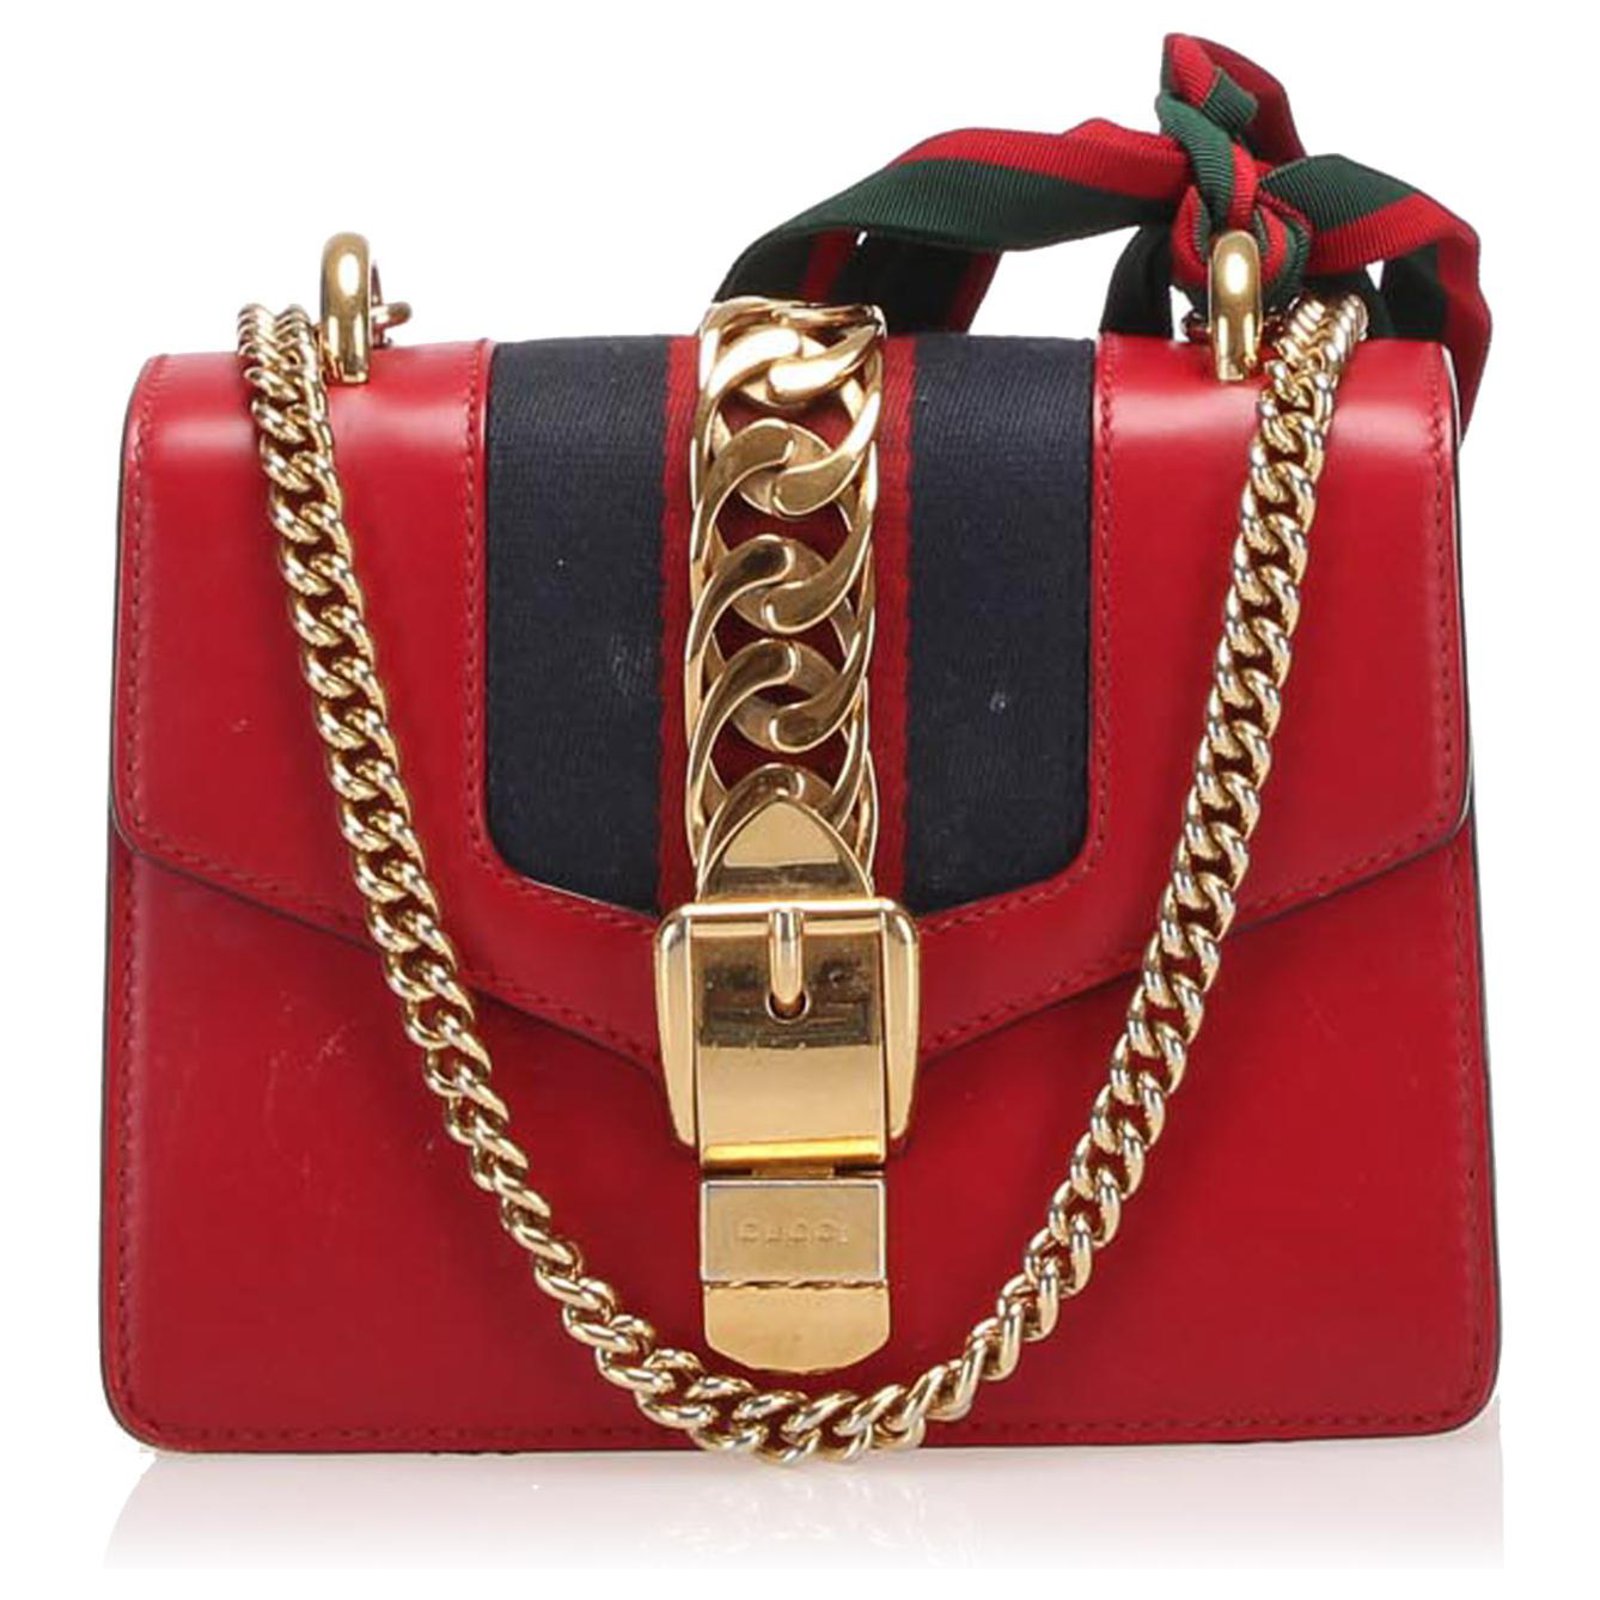 Gucci Red Mini Sylvie Leather Chain Shoulder Bag Multiple colors